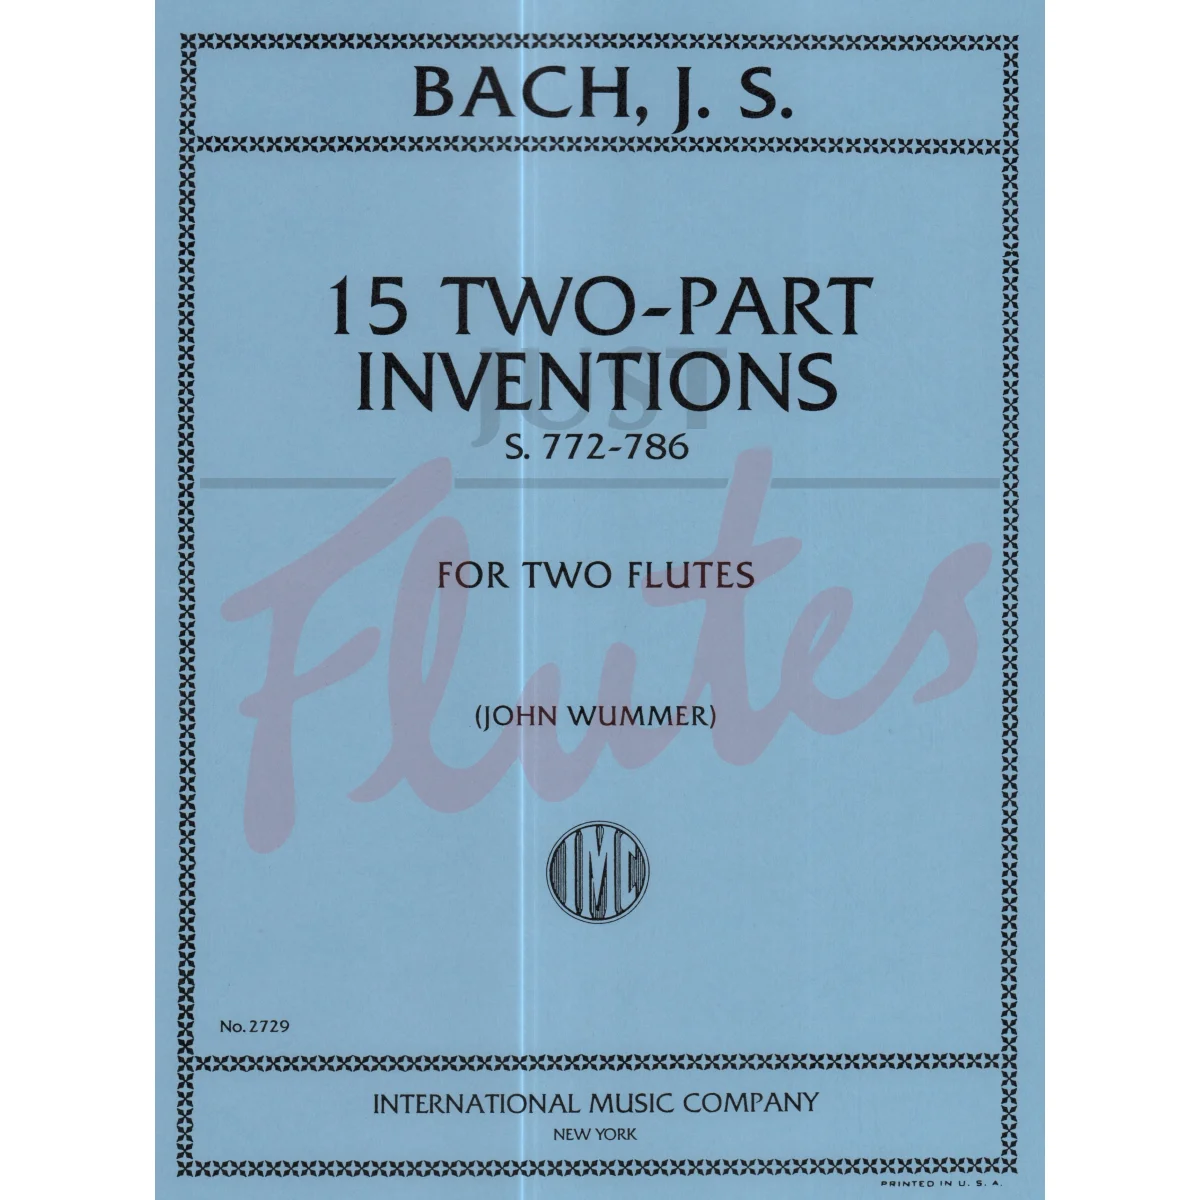 15 Two-Part Inventions for Two Flutes